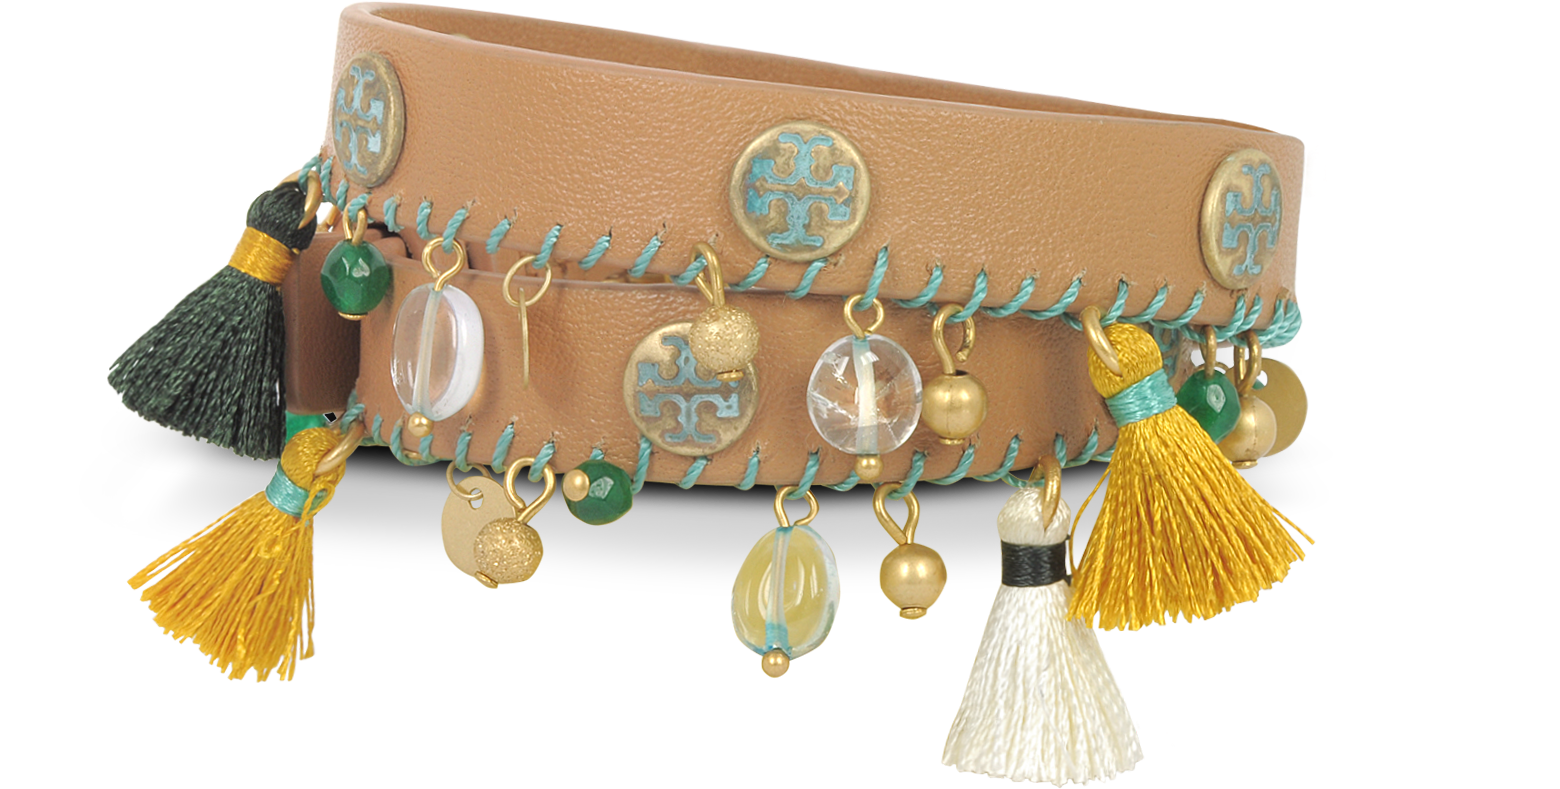 Tory Burch Aged Vachetta Leather and Vintage Gold Brass Tassel Double Wrap  Bracelet at FORZIERI